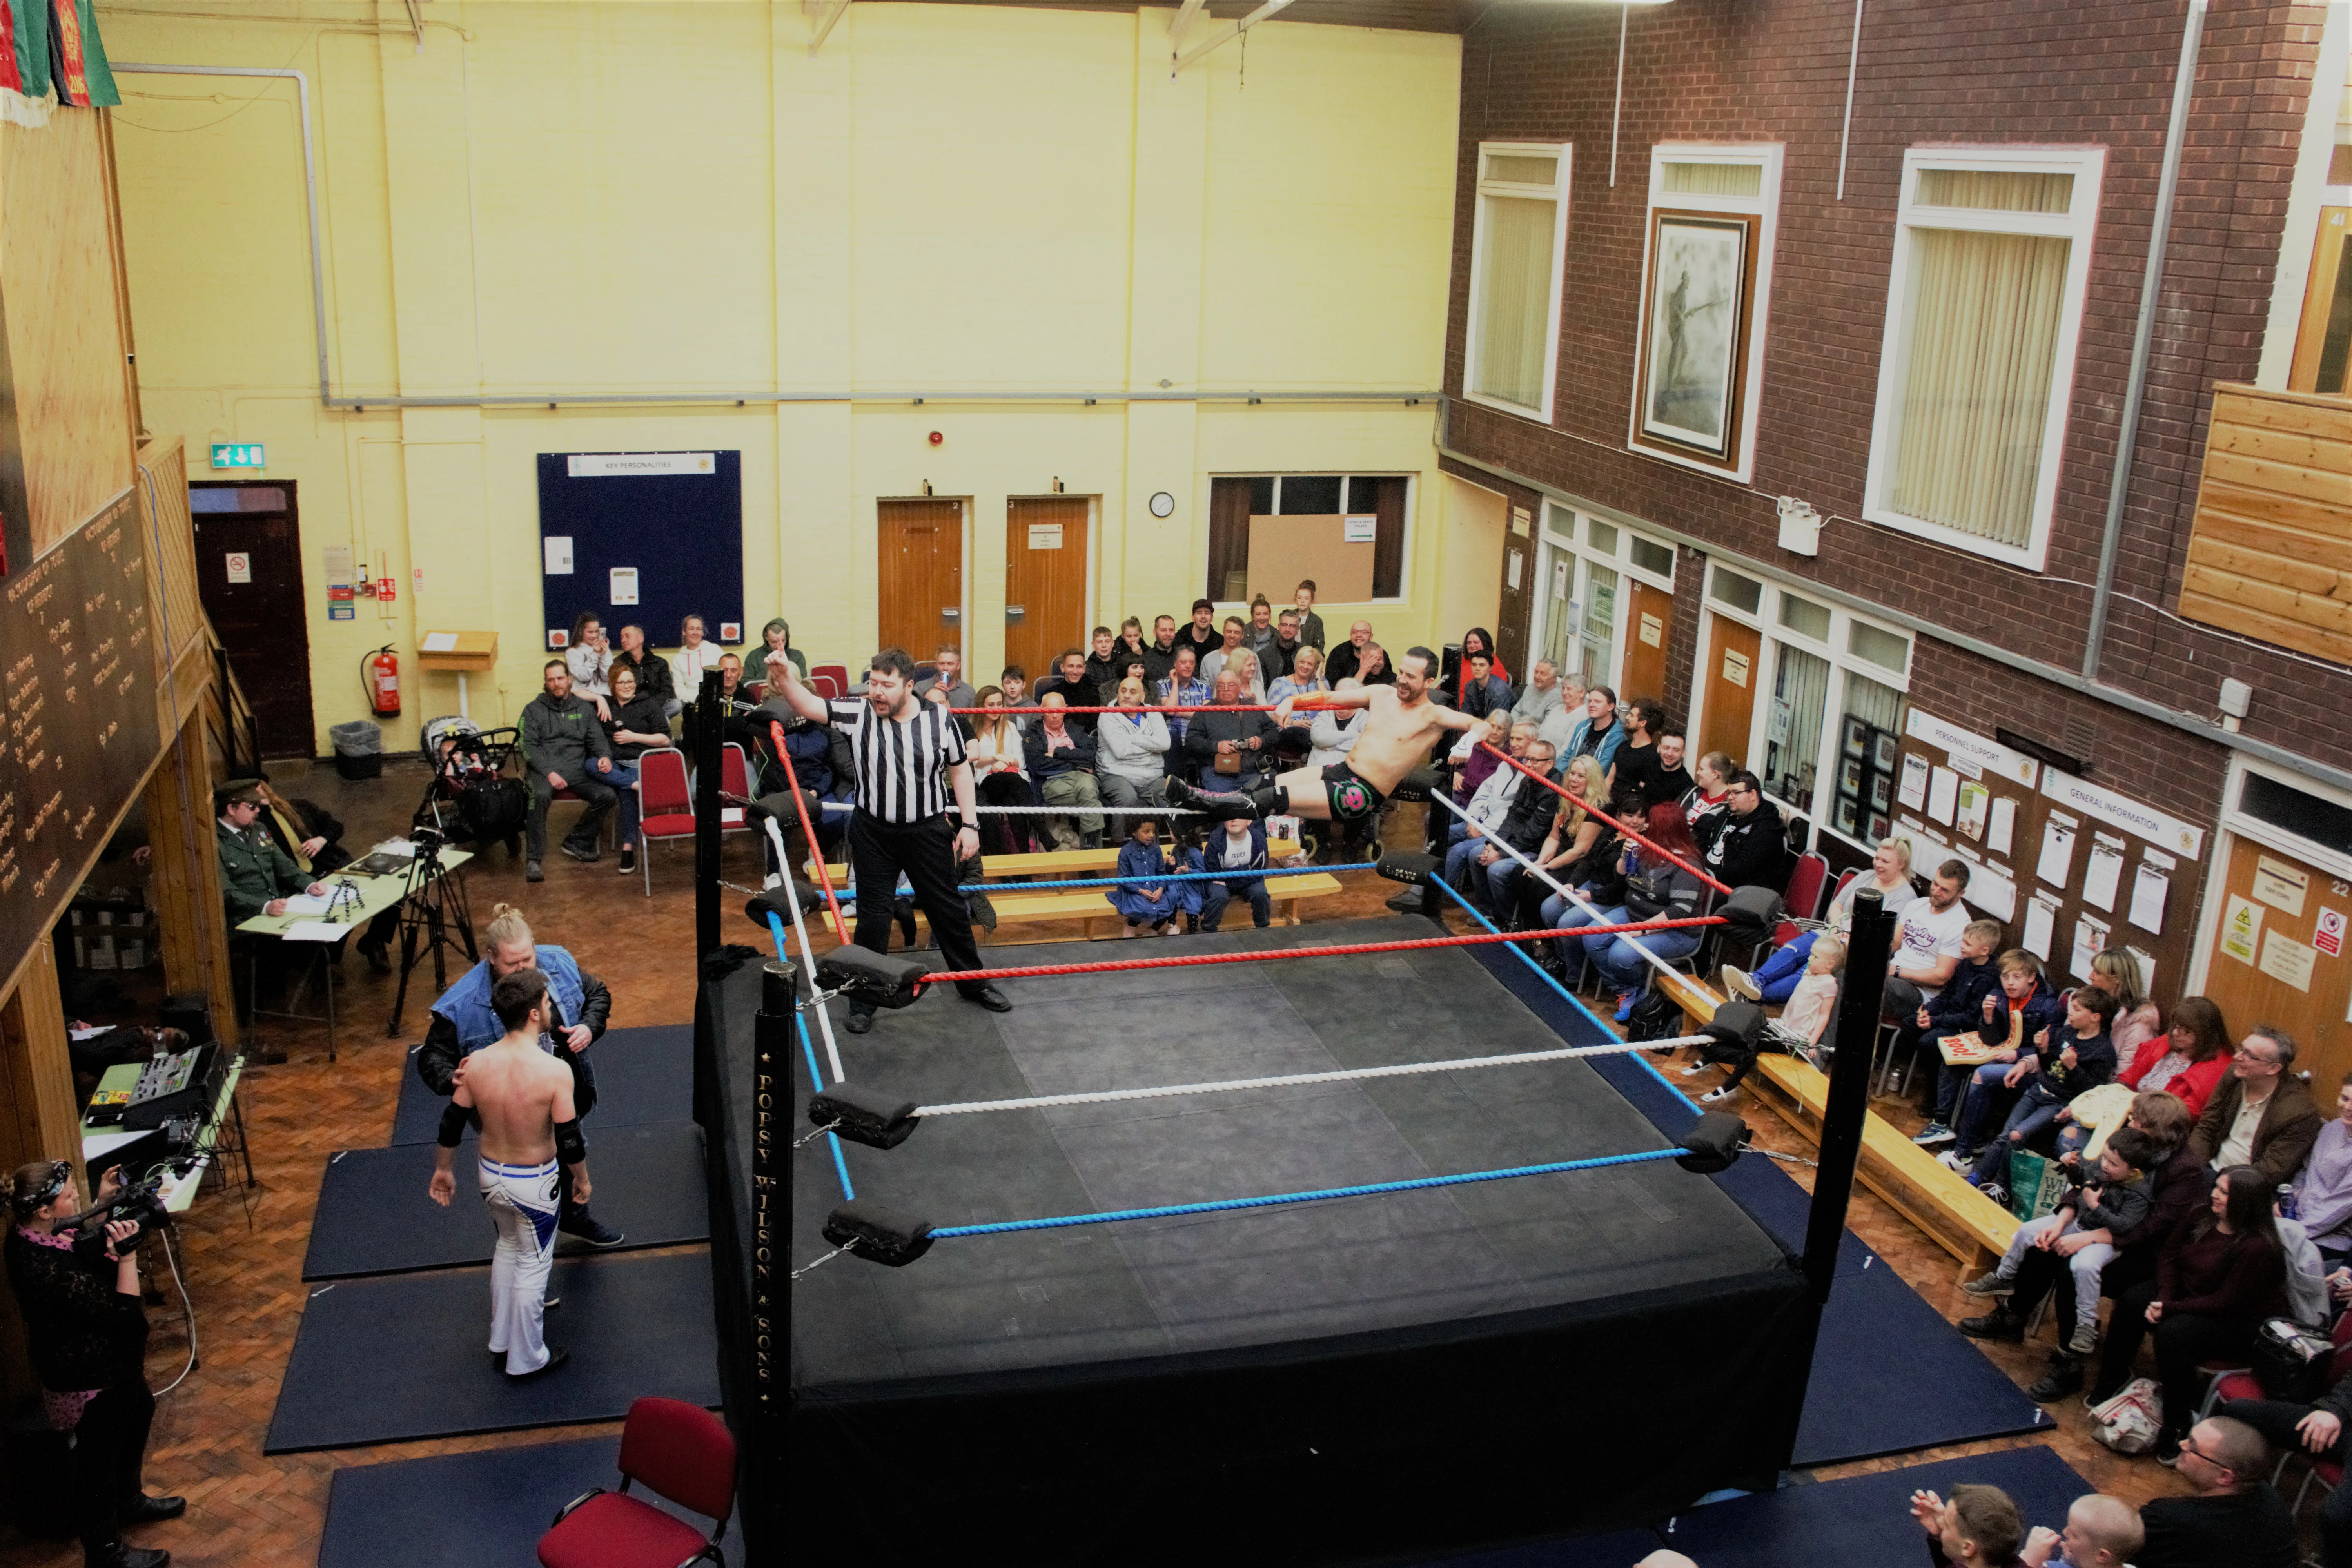 Lancashire Wrestling Federation in the ring